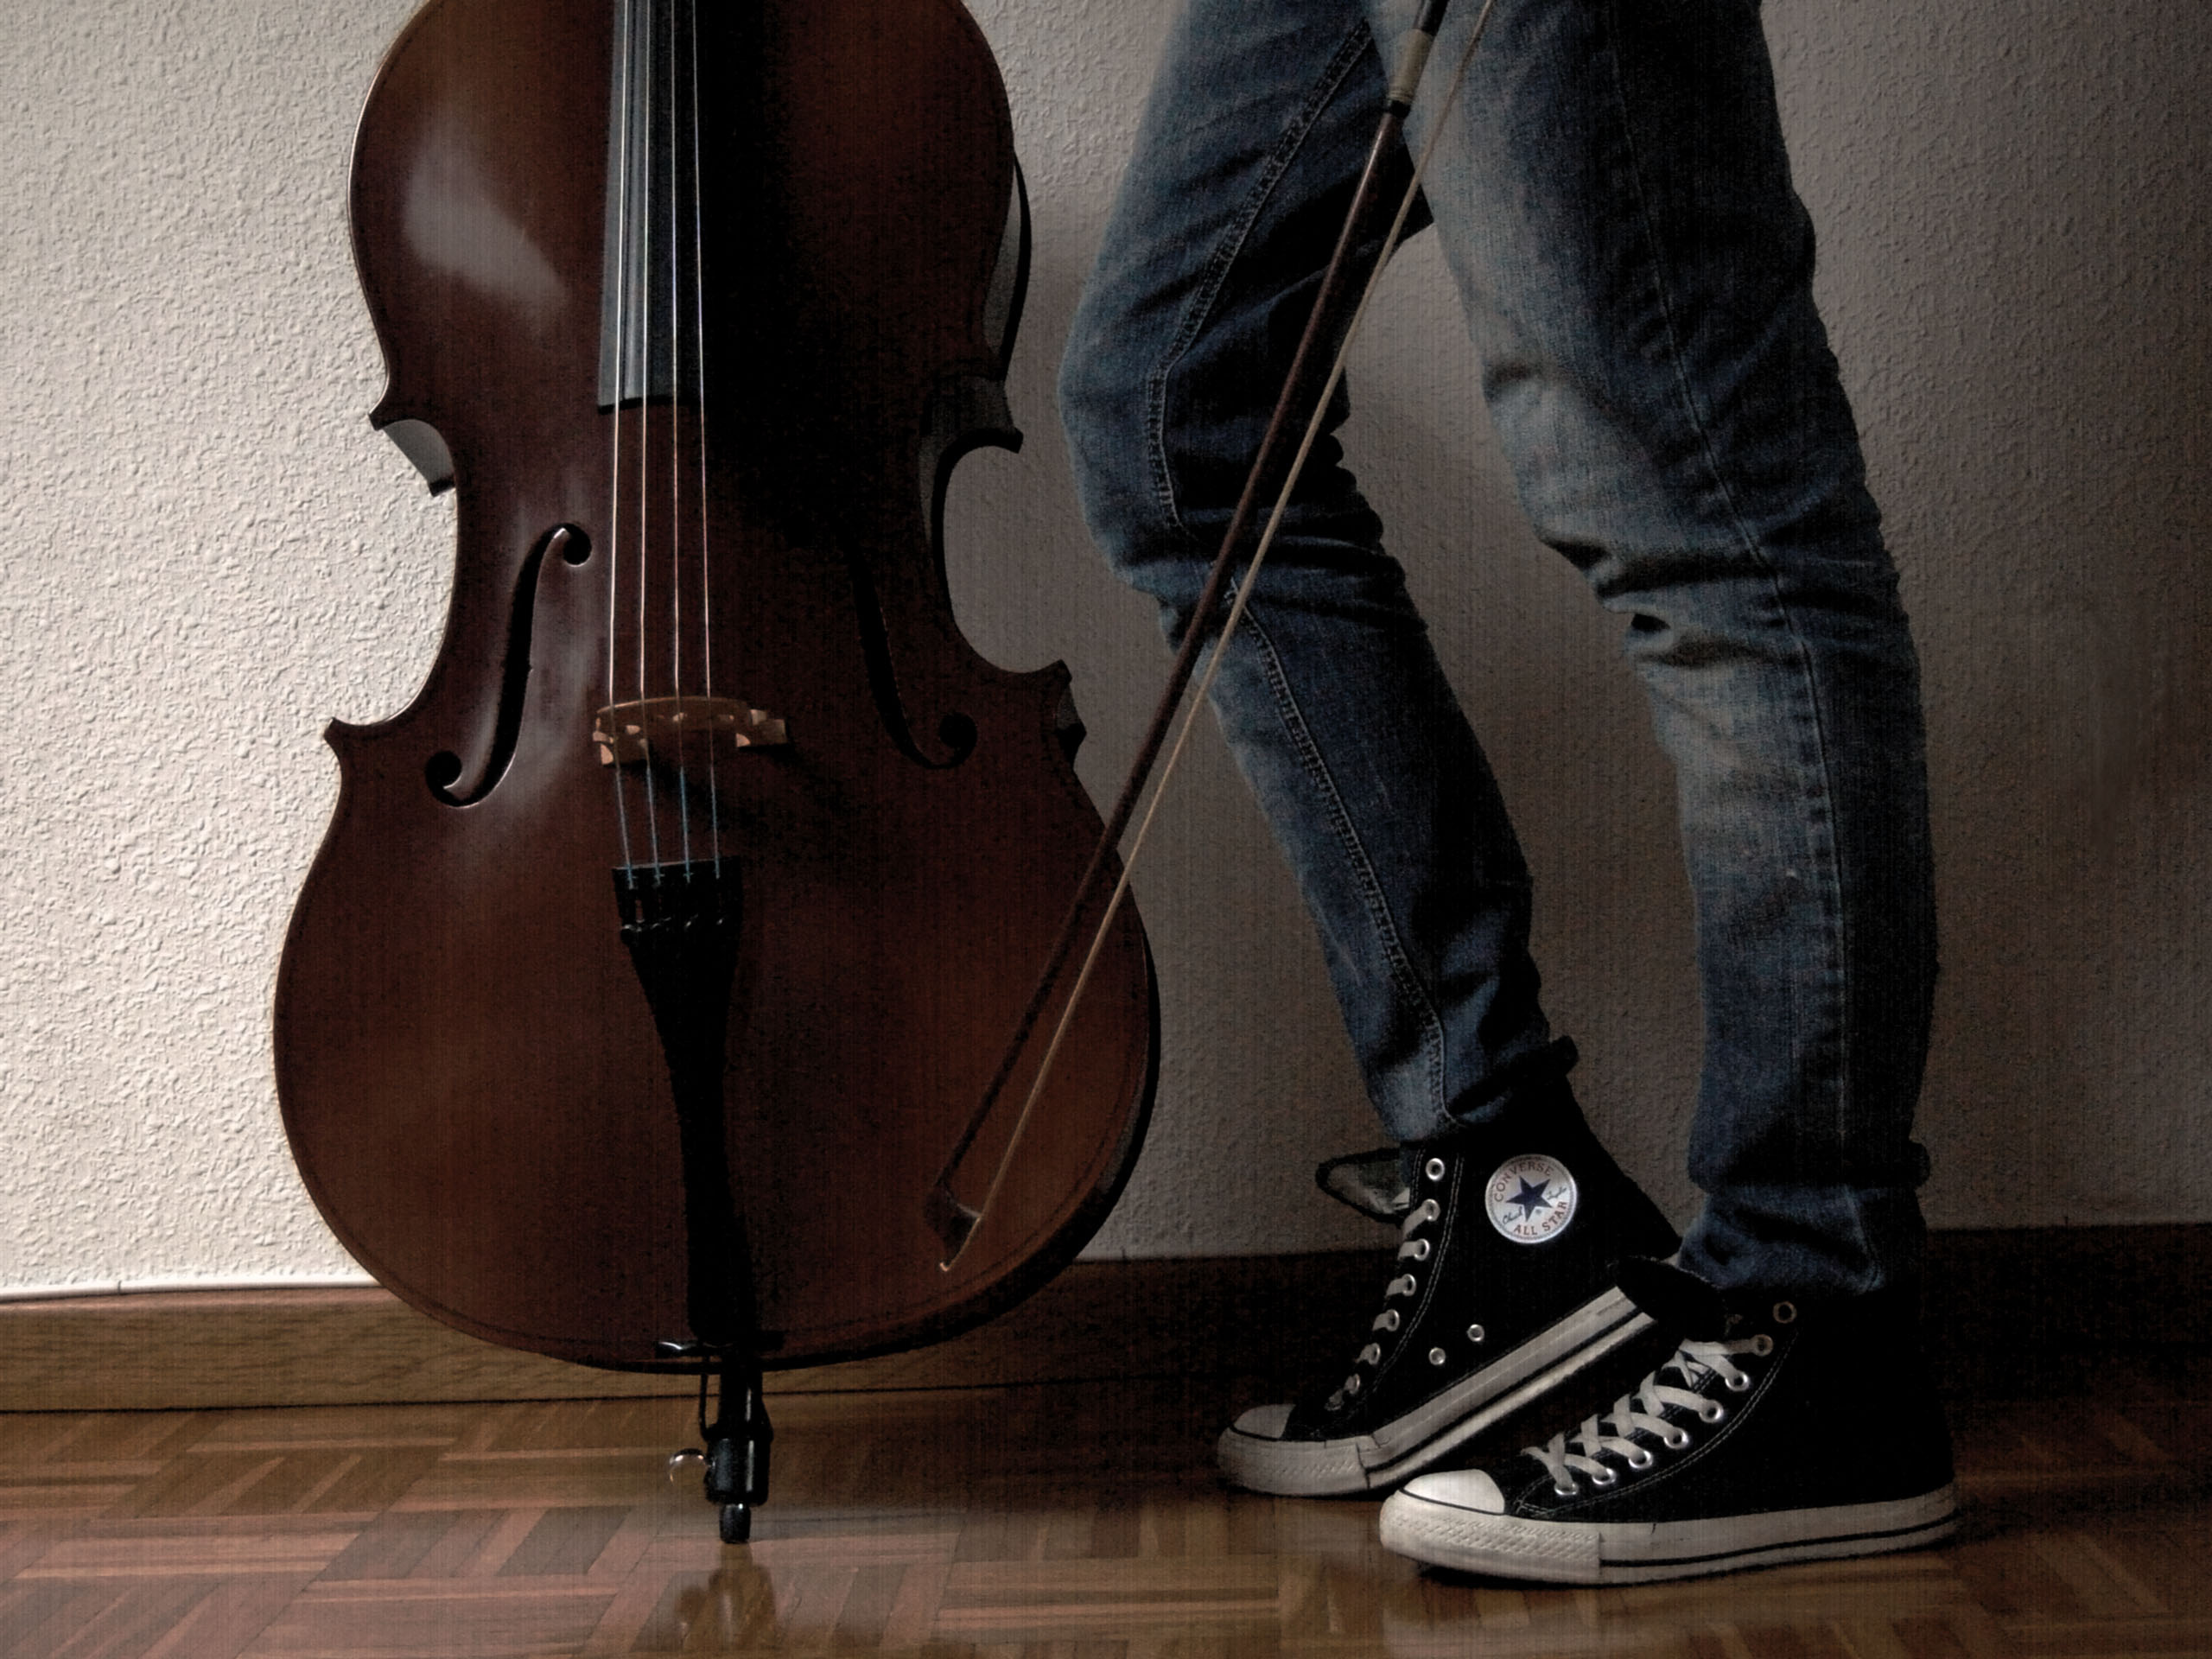 Violoncello: Cello, String Instrument, Violinist, French Bow, Maple Wood Corpus. 2560x1920 HD Background.